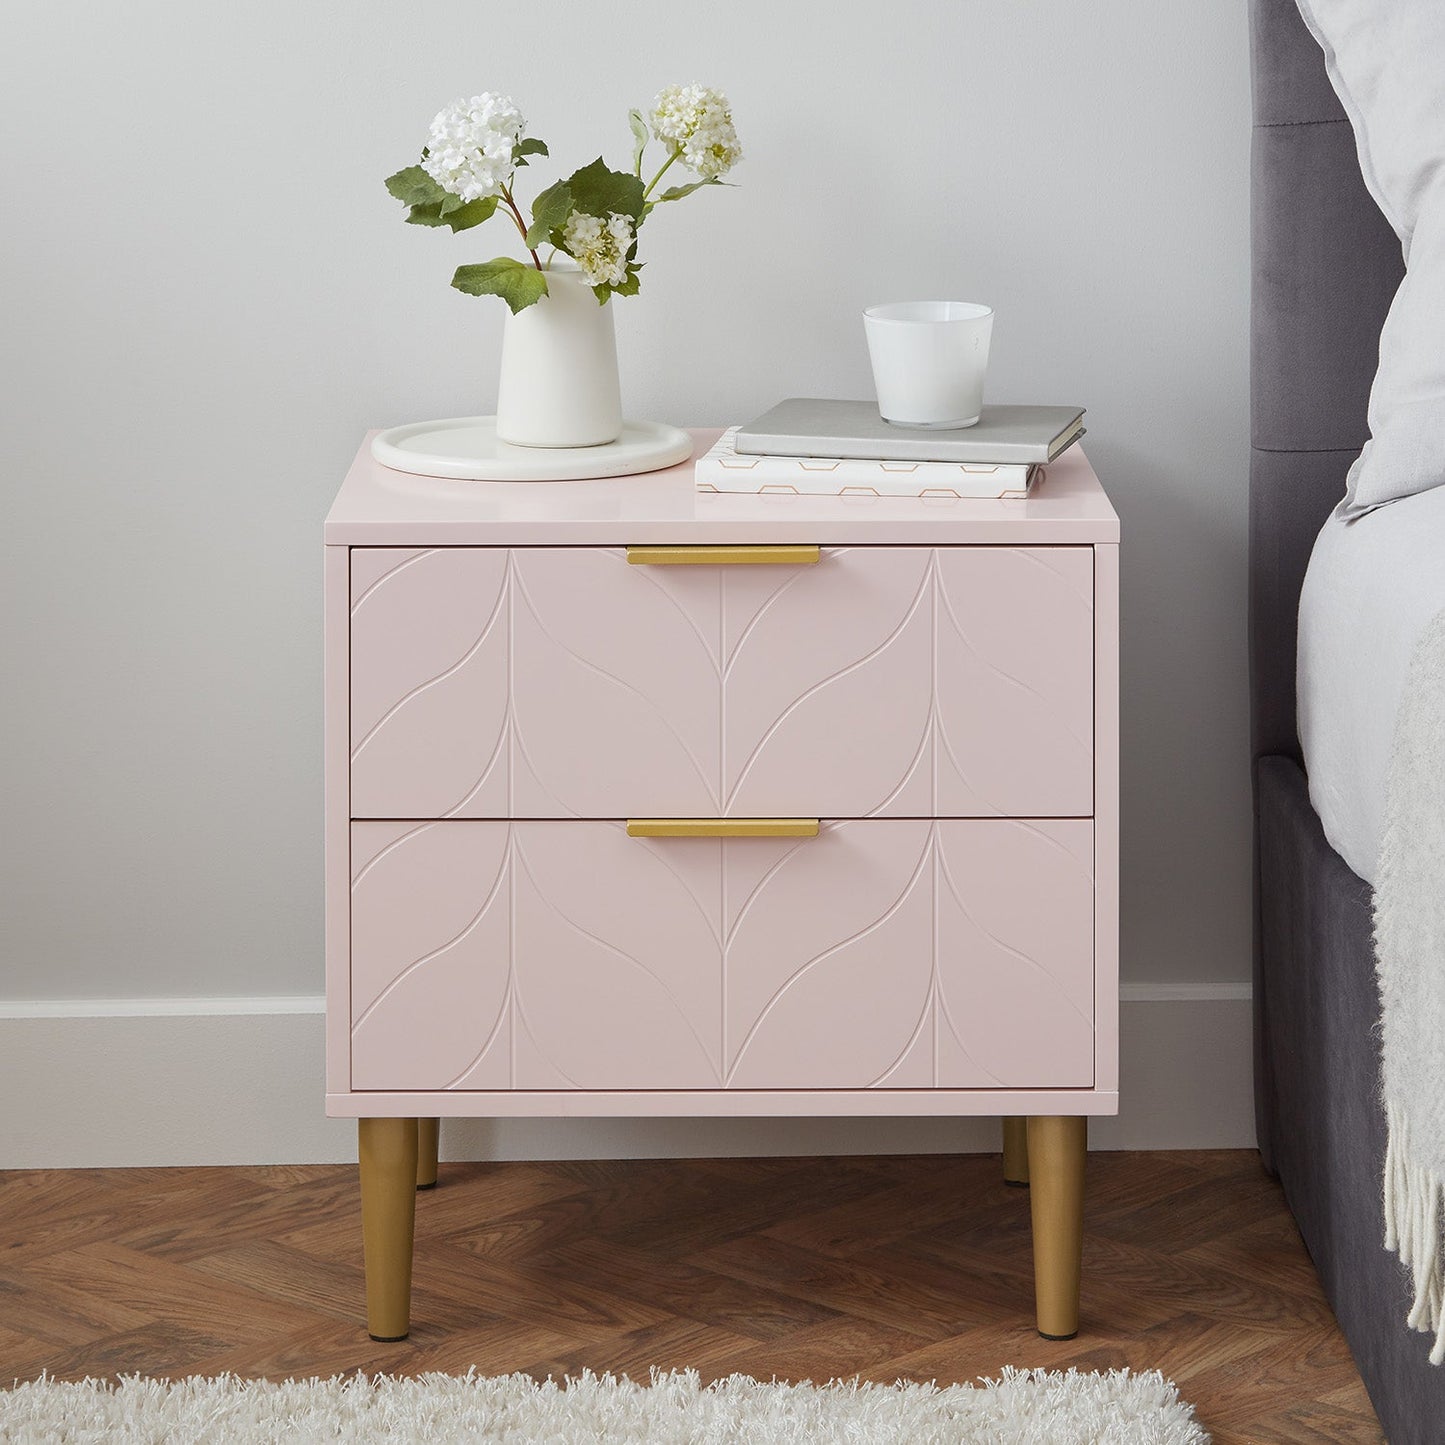 Gloria wardrobe and drawers set -3 drawer chest of drawers - pink - Laura James